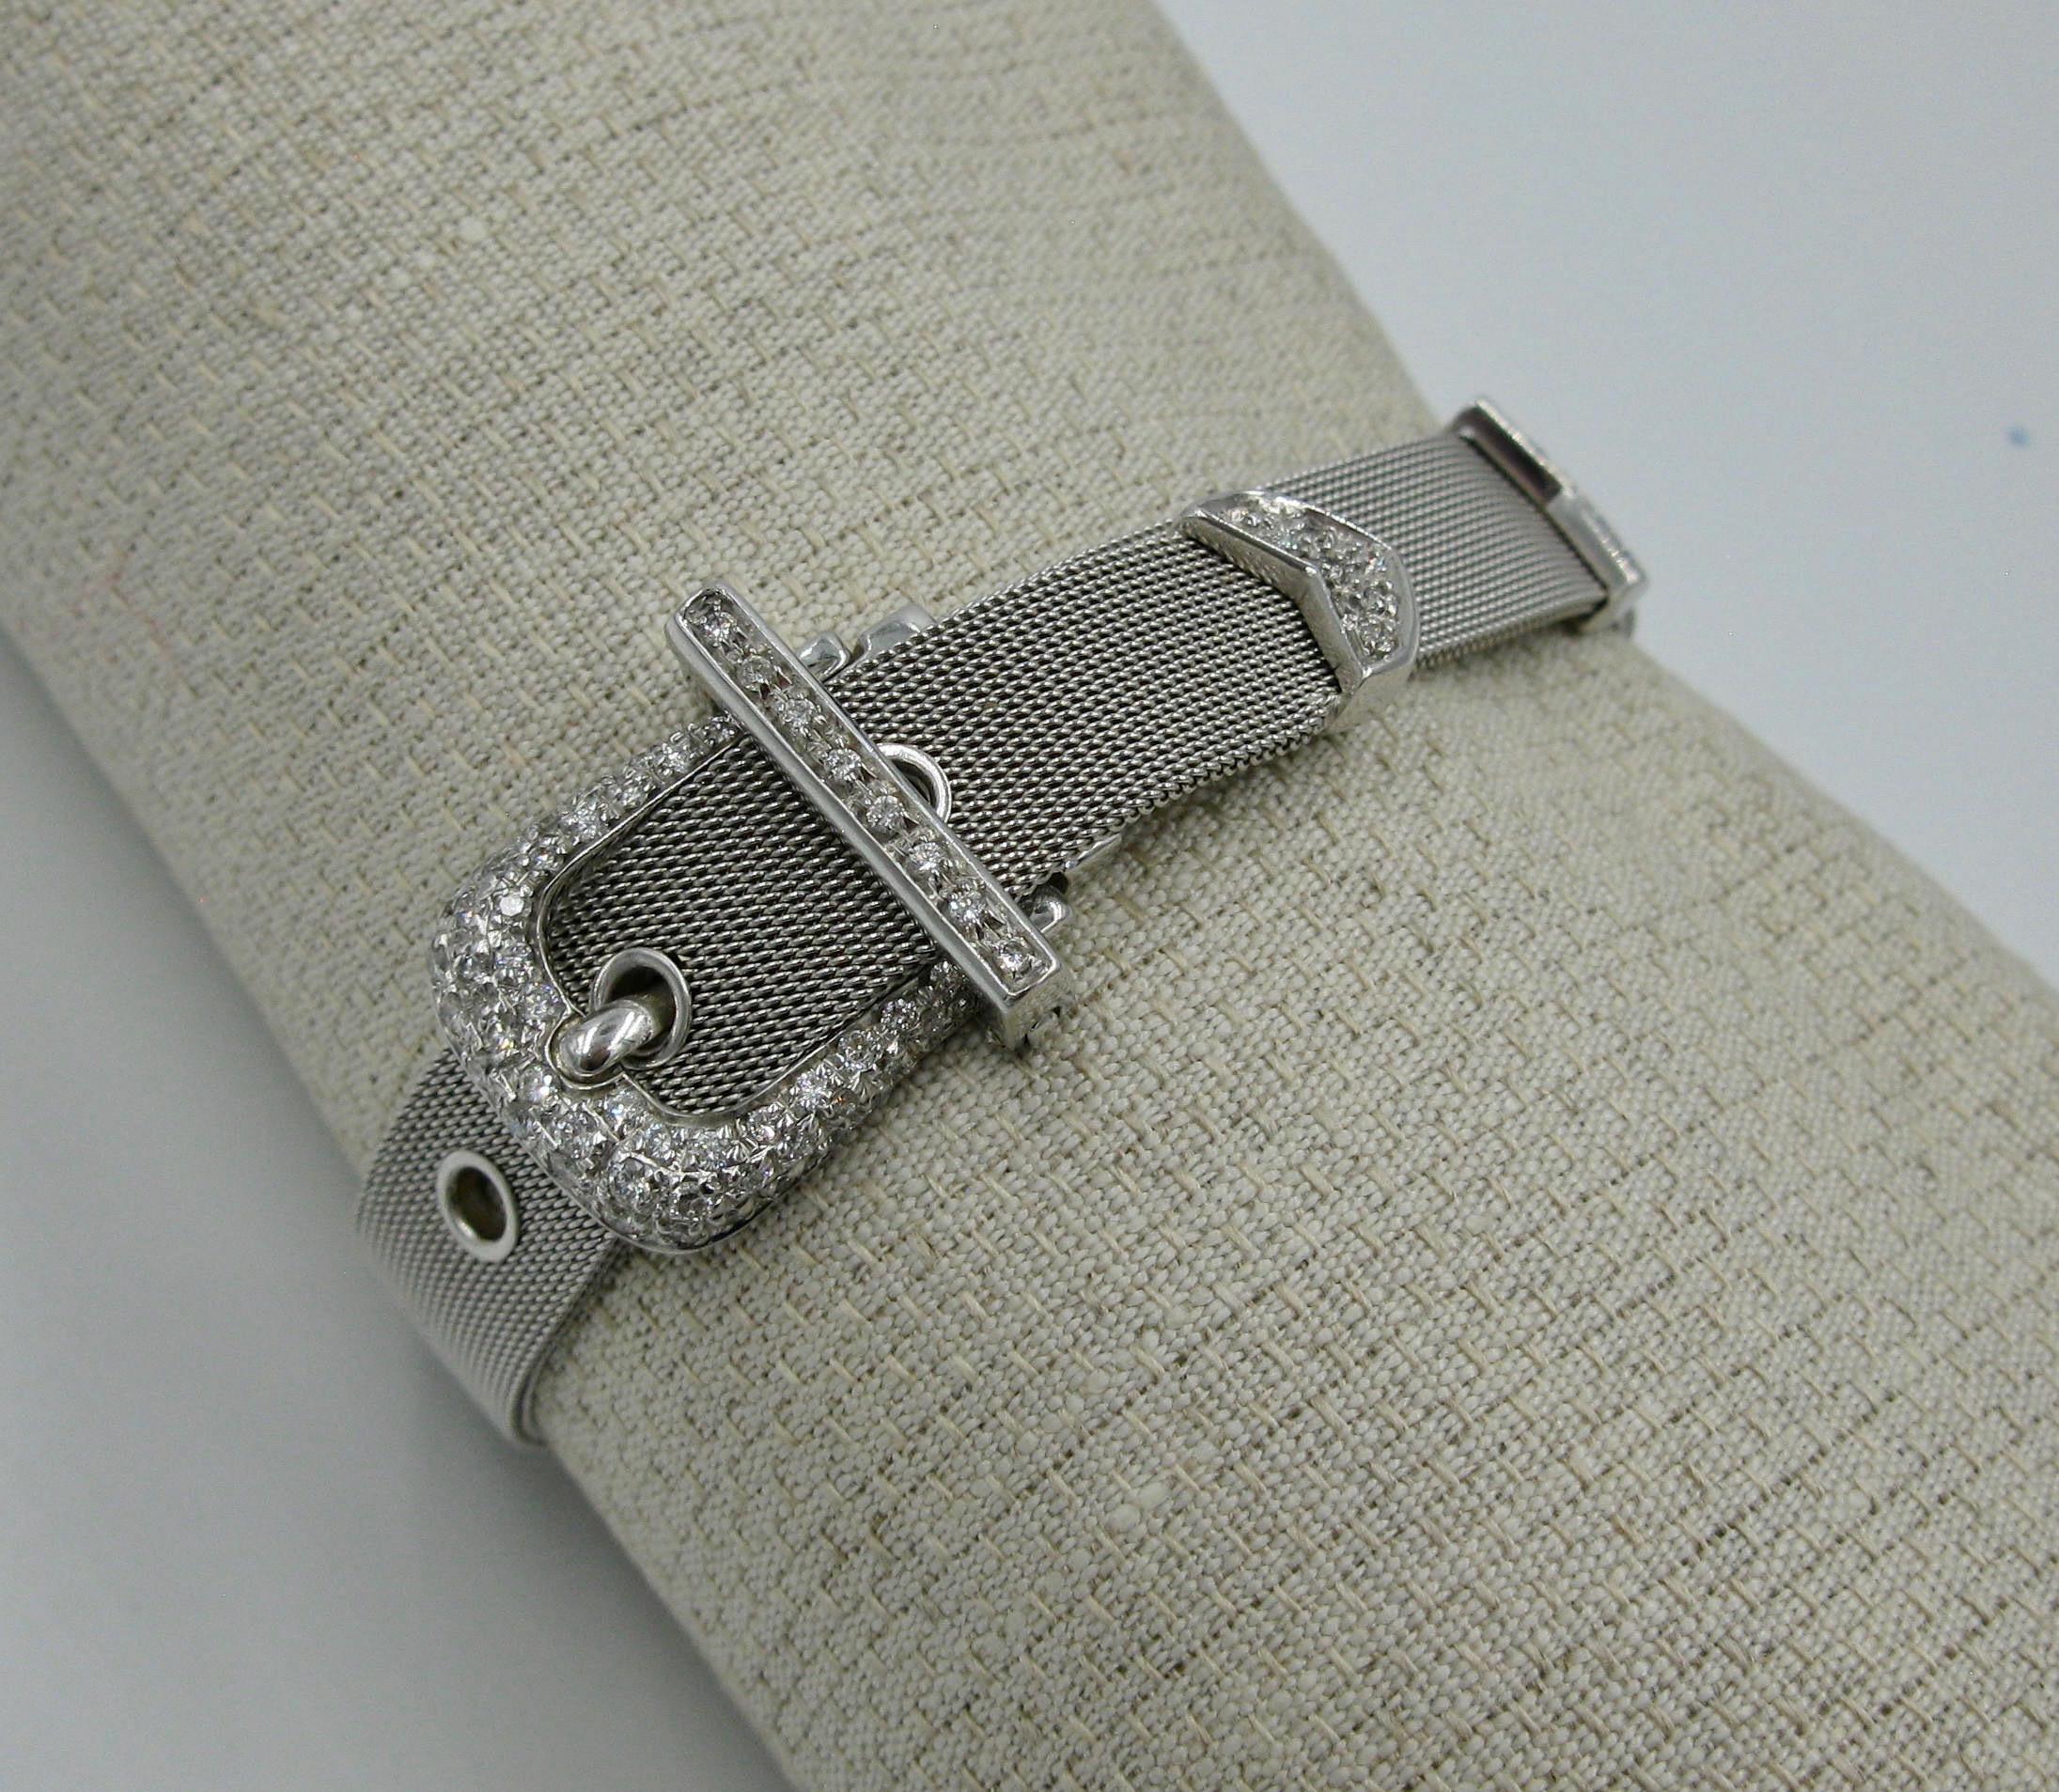 A magnificent Diamond Buckle Bracelet with classic style.   The sensuous bracelet is in 18 Karat White Gold mesh - scrumptious!  The bracelet is set with brilliant white diamonds which total 1 Carat and are H color (very white).  In addition to the